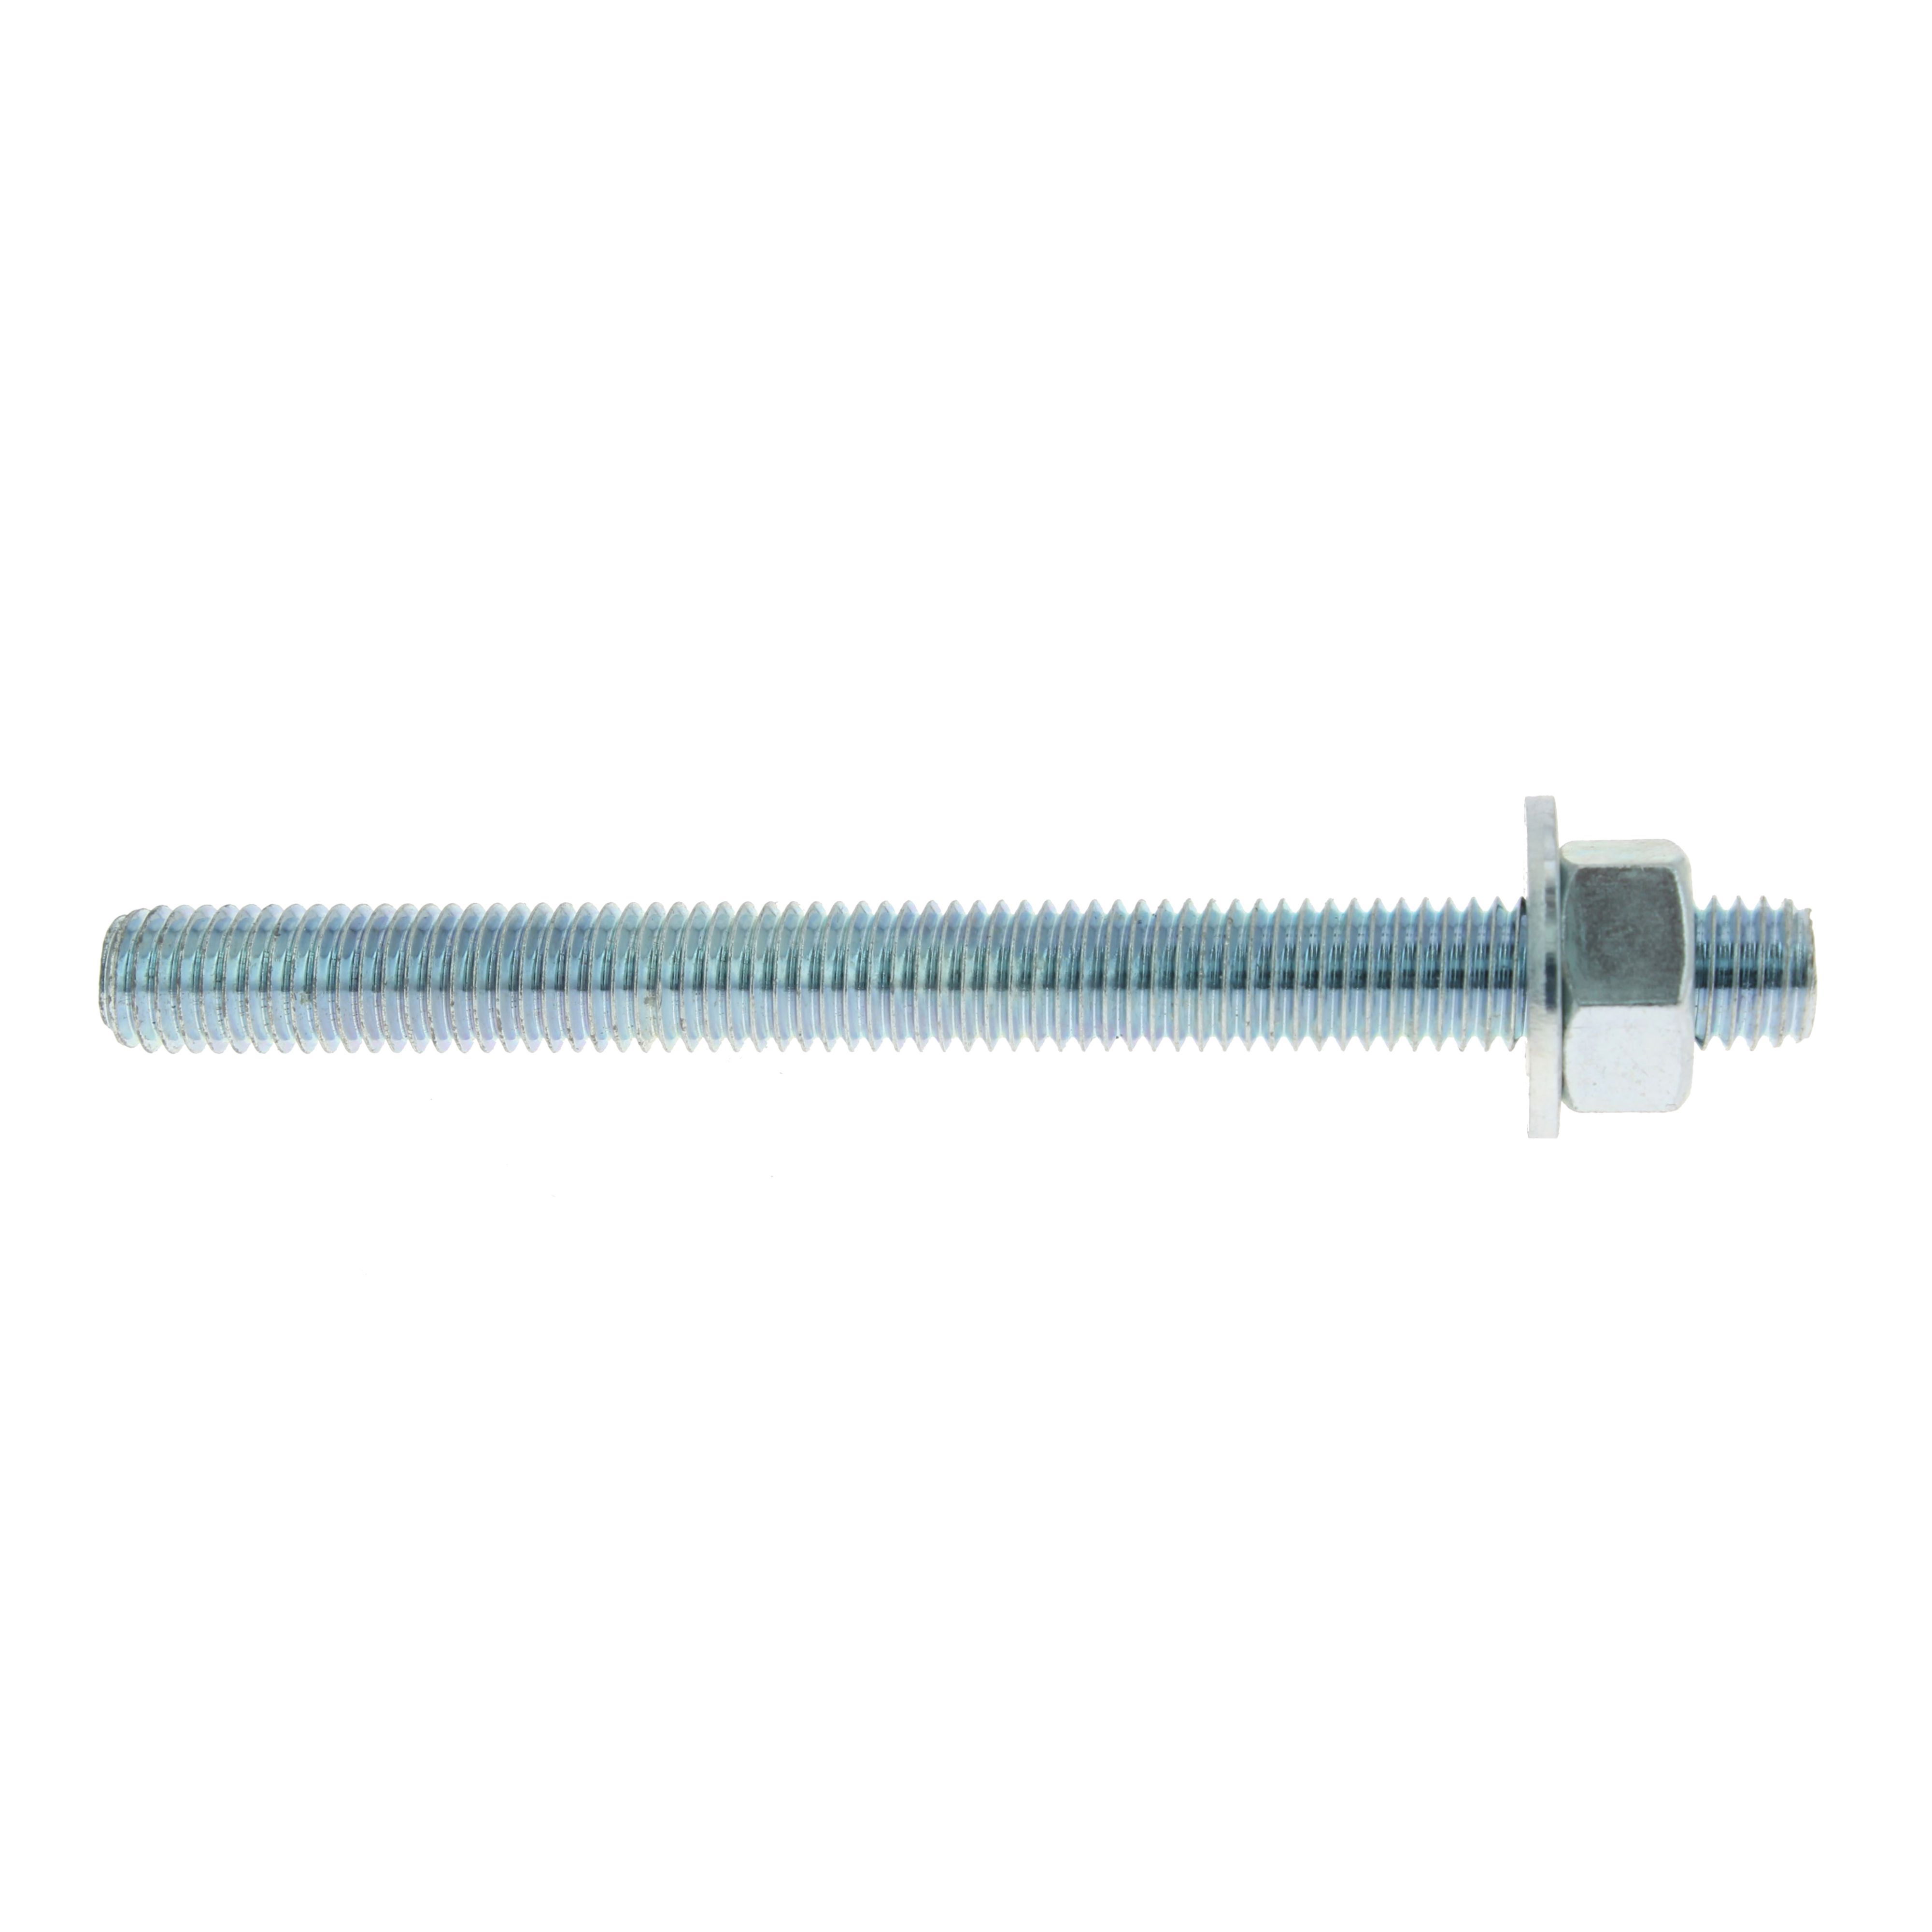 Diall Zinc-plated Steel Threaded stud (L)0.16m (Dia)12mm, Pack of 4